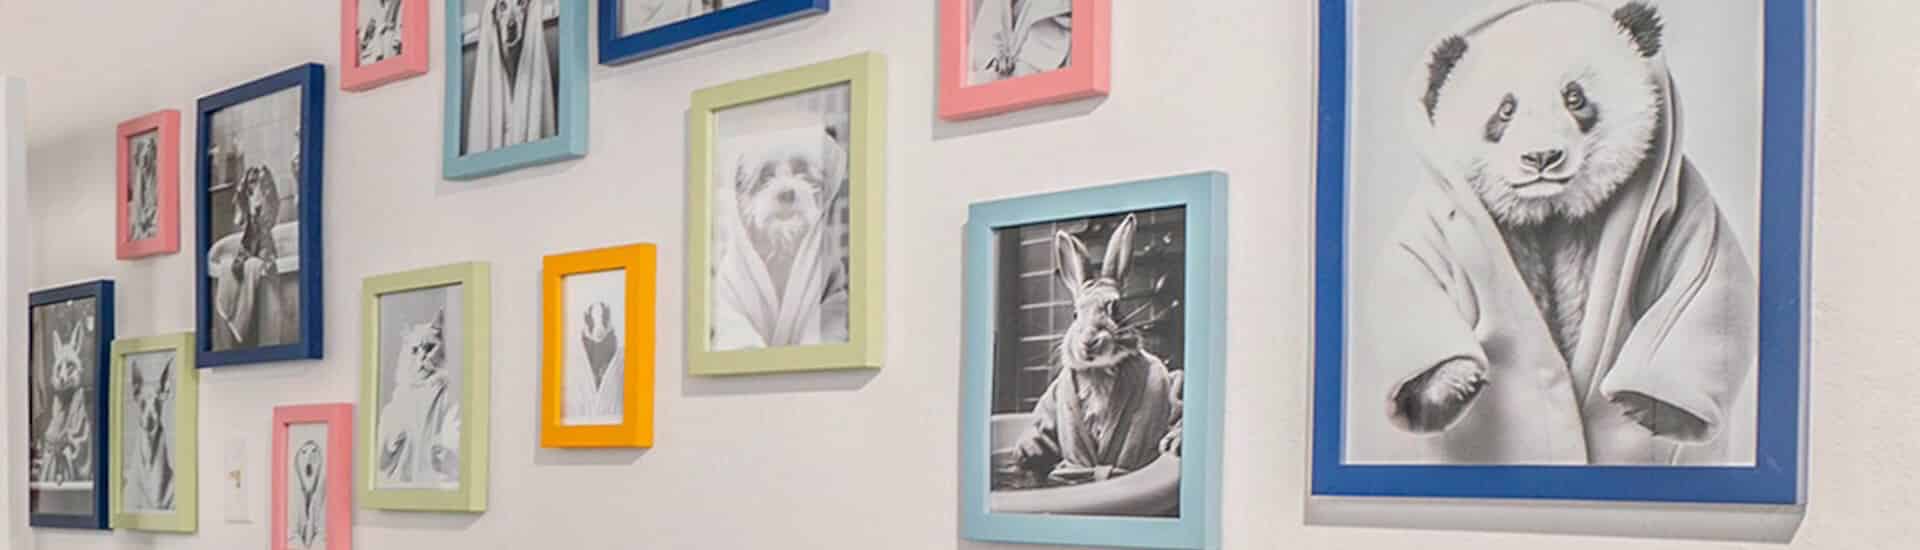 A wall in a house lined with animal photos in various colored frames.